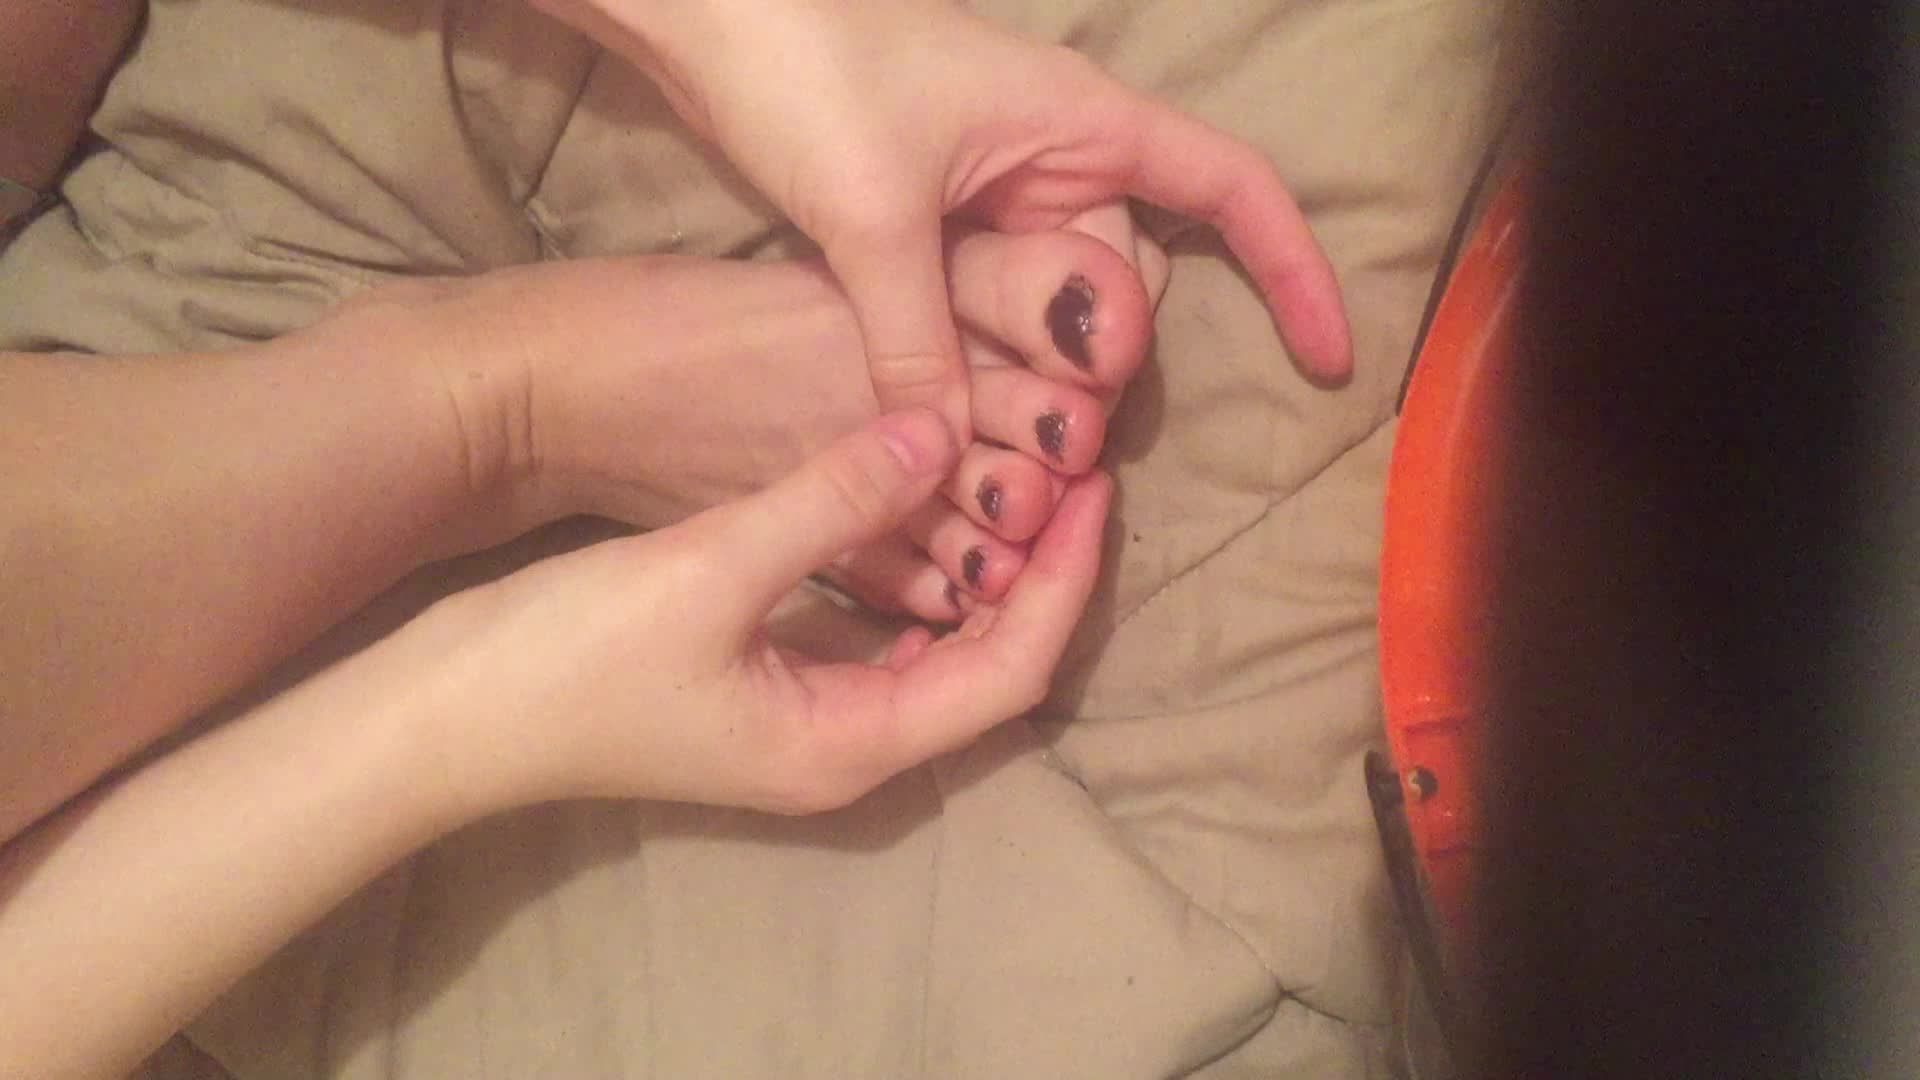 First ever foot fetish video!